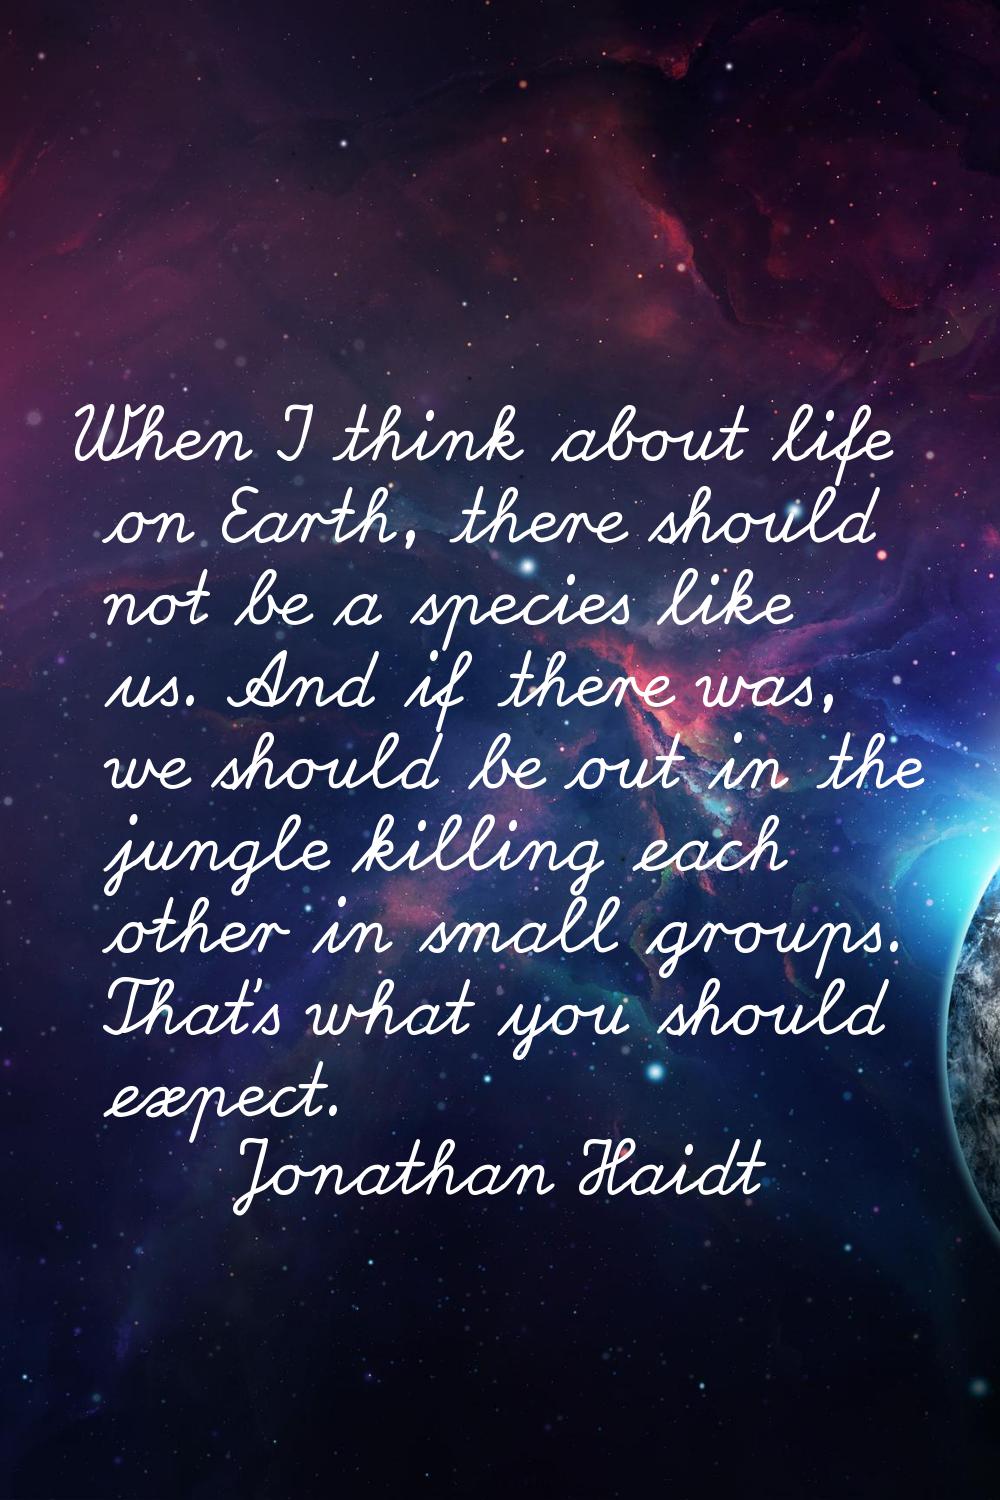 When I think about life on Earth, there should not be a species like us. And if there was, we shoul